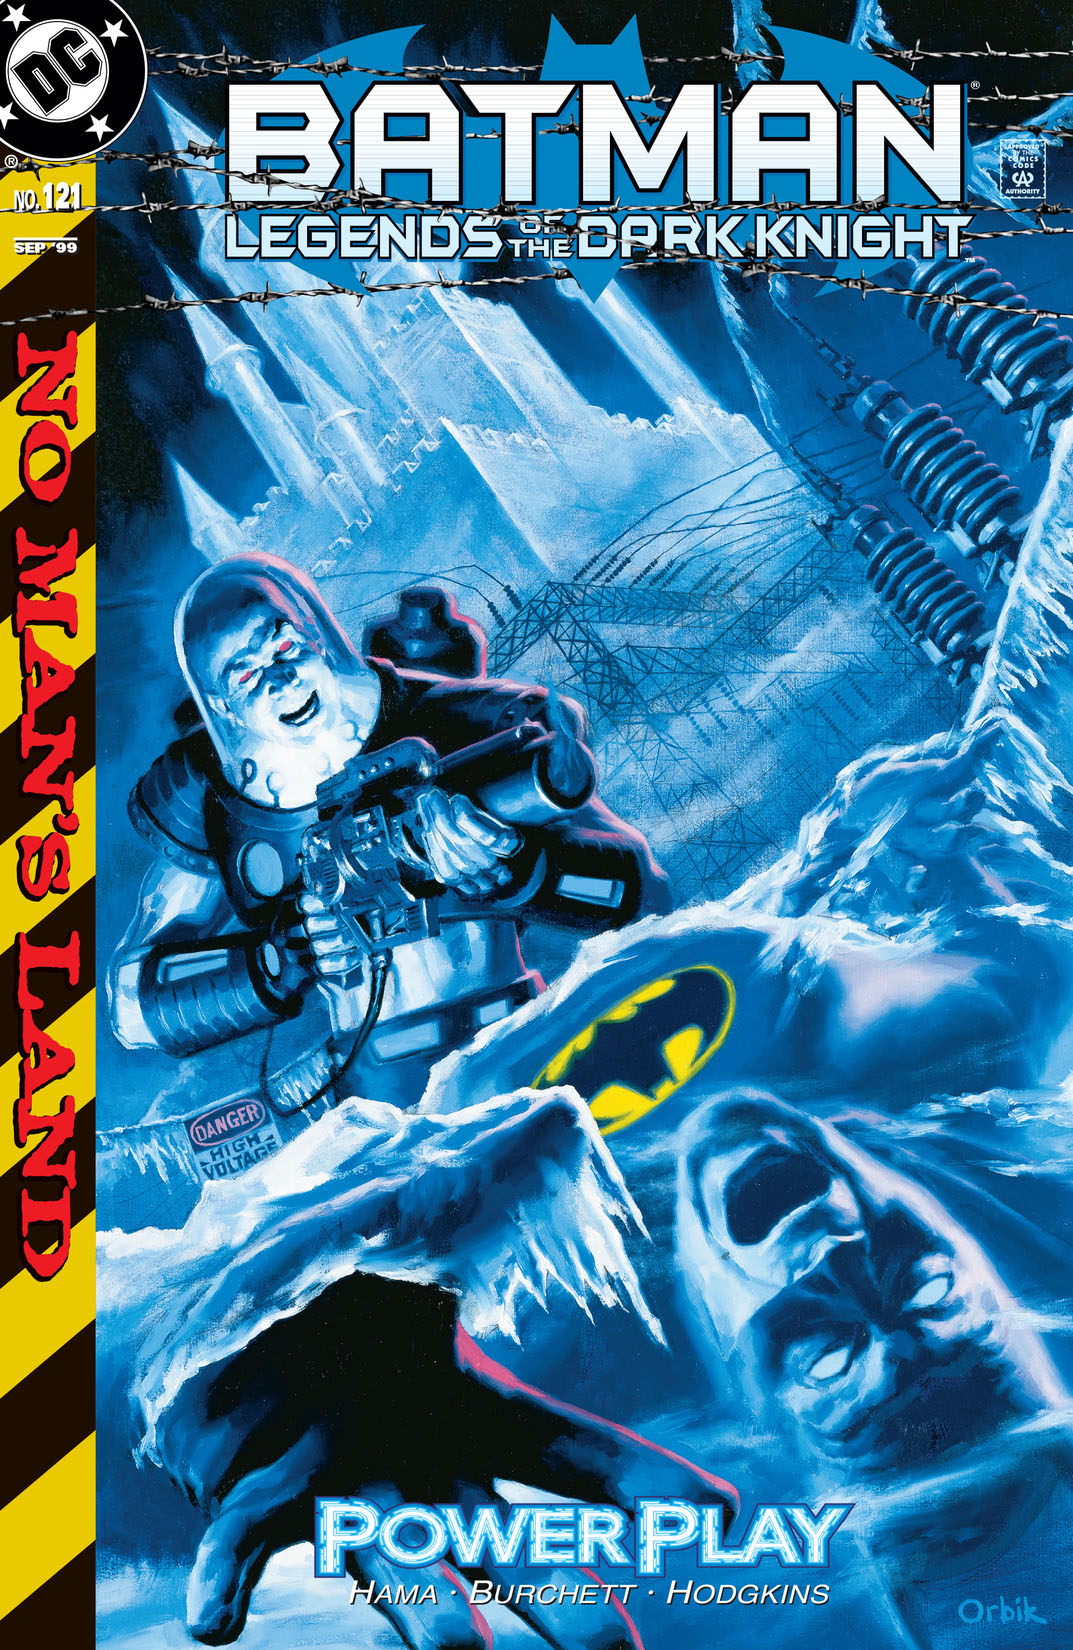 Batman: Legends of the Dark Knight #121 preview images